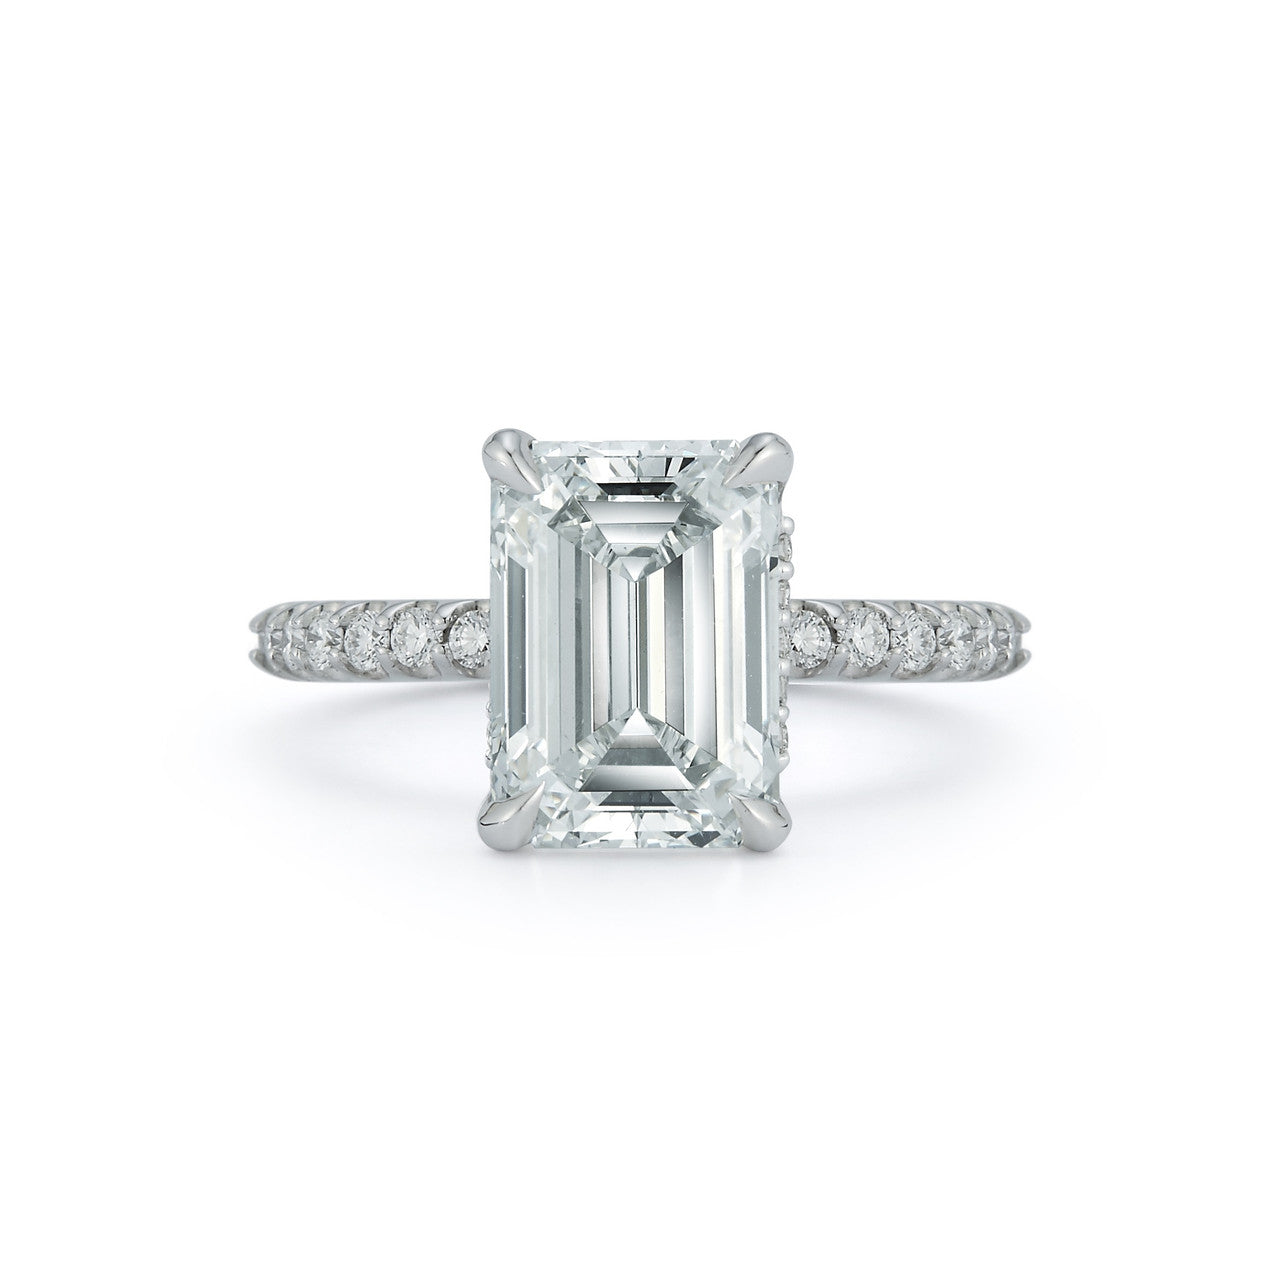 Diamond Engagement Rings: Pave Engagement Ring with 3.01 ct Emerald